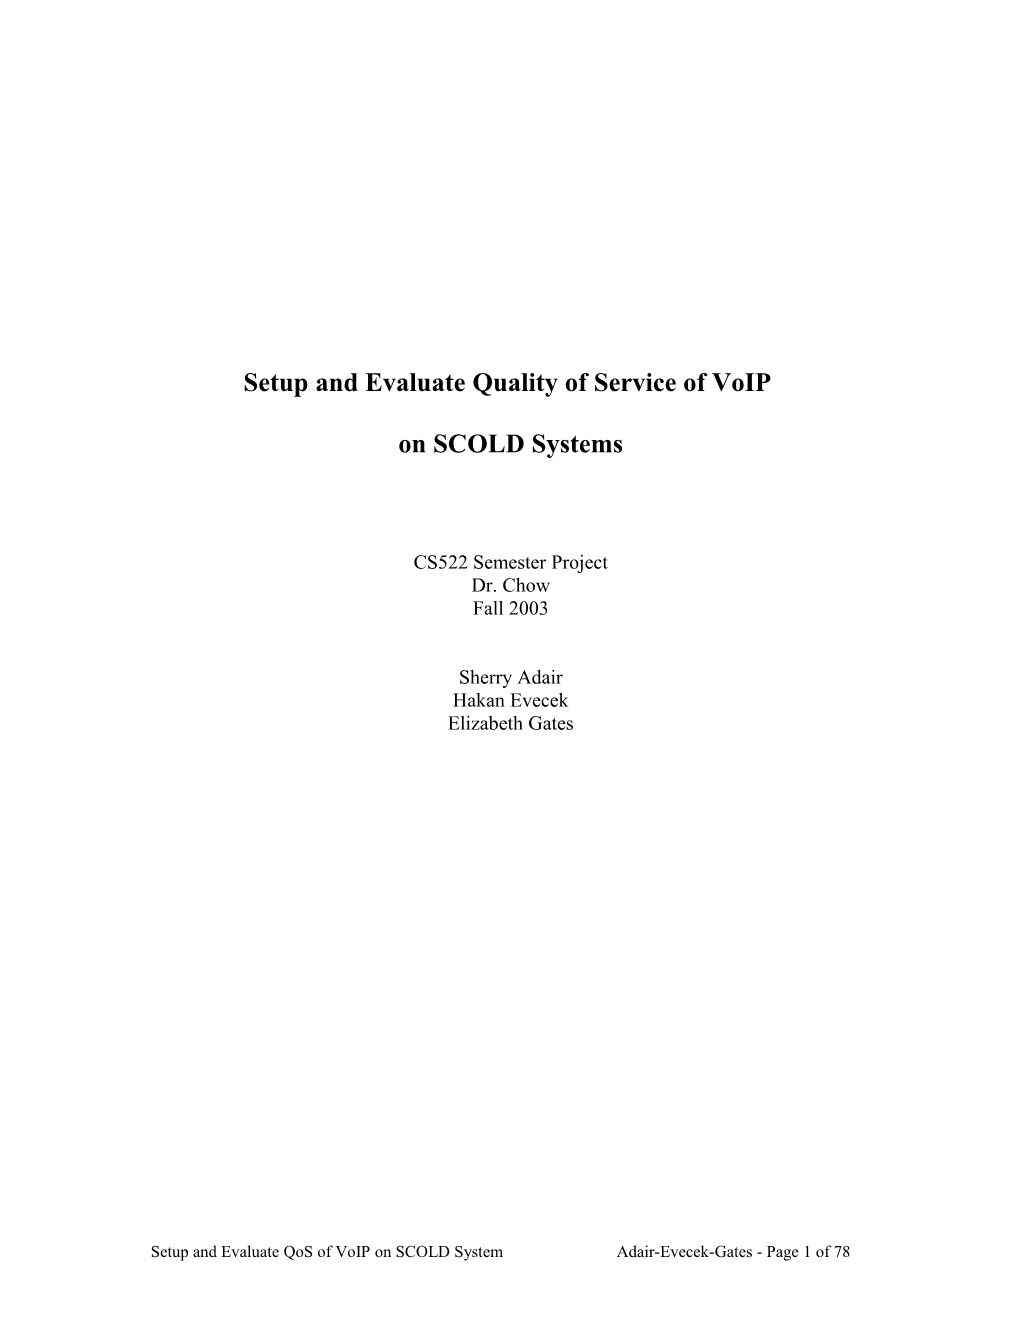 Setup and Evaluate Qos of Voip on SCOLD